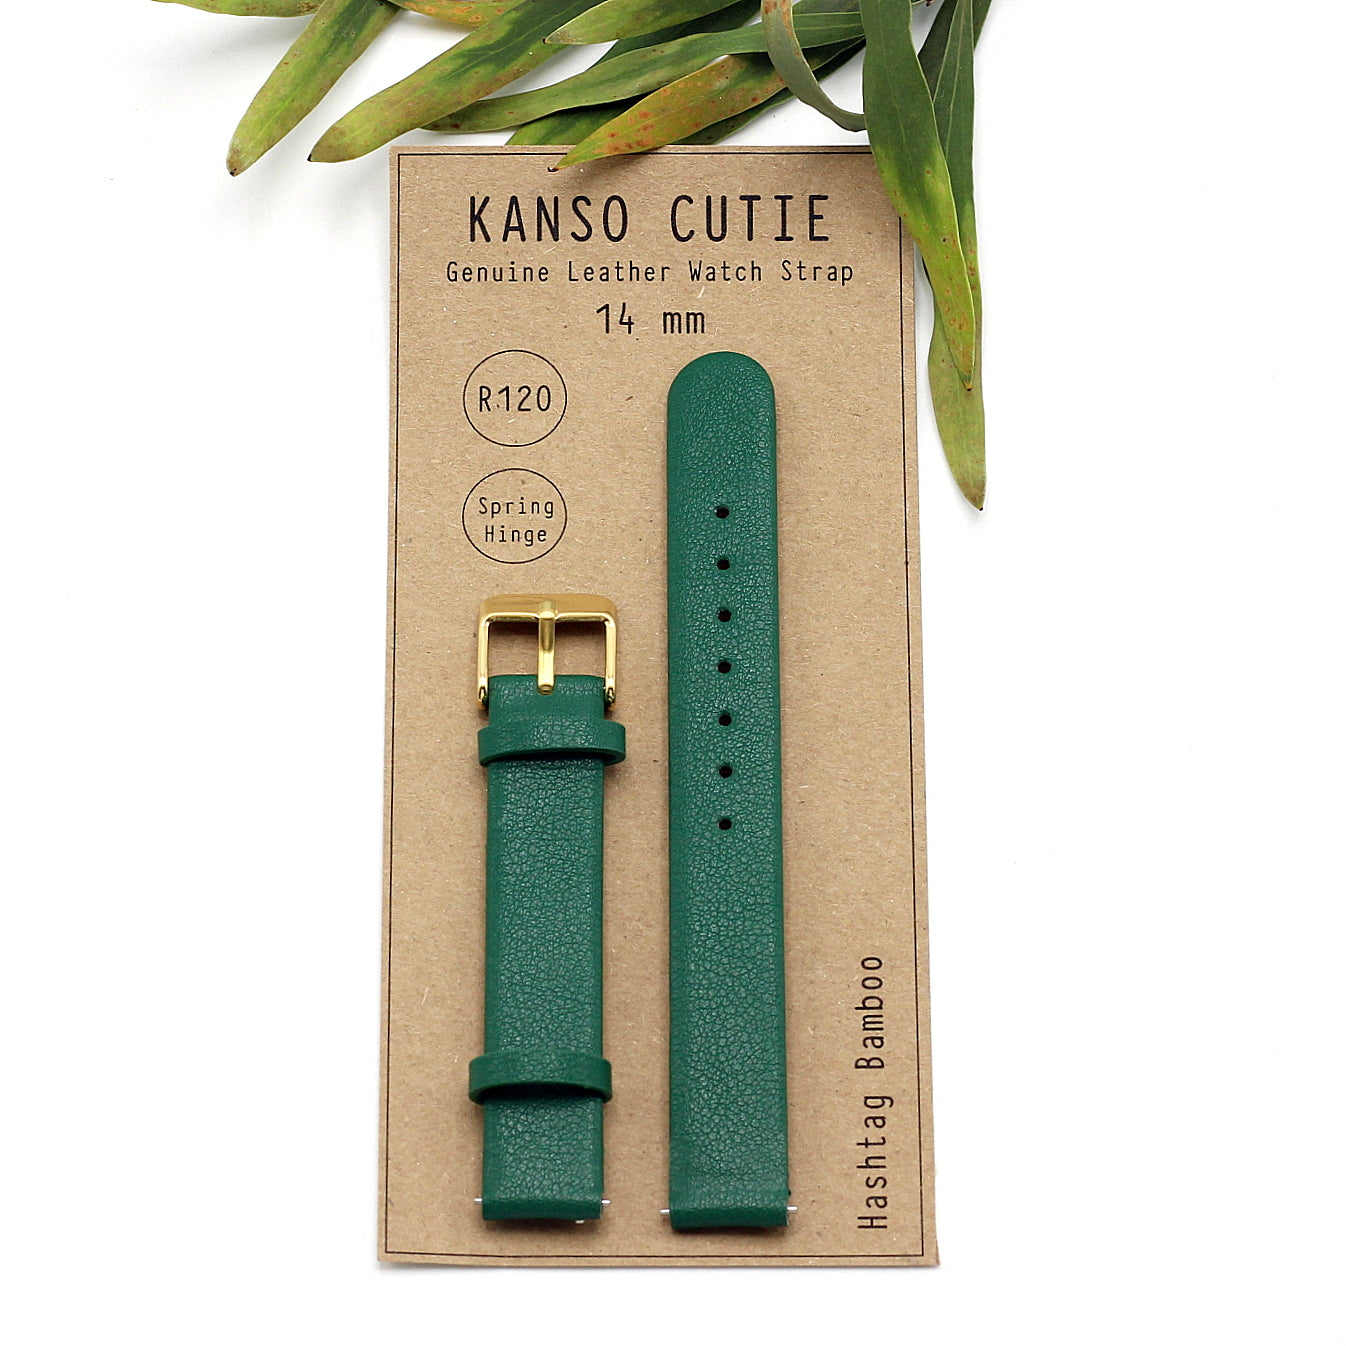 Cutie Watch Strap Genuine Leather 14mm includes quick release pin for easy changing.